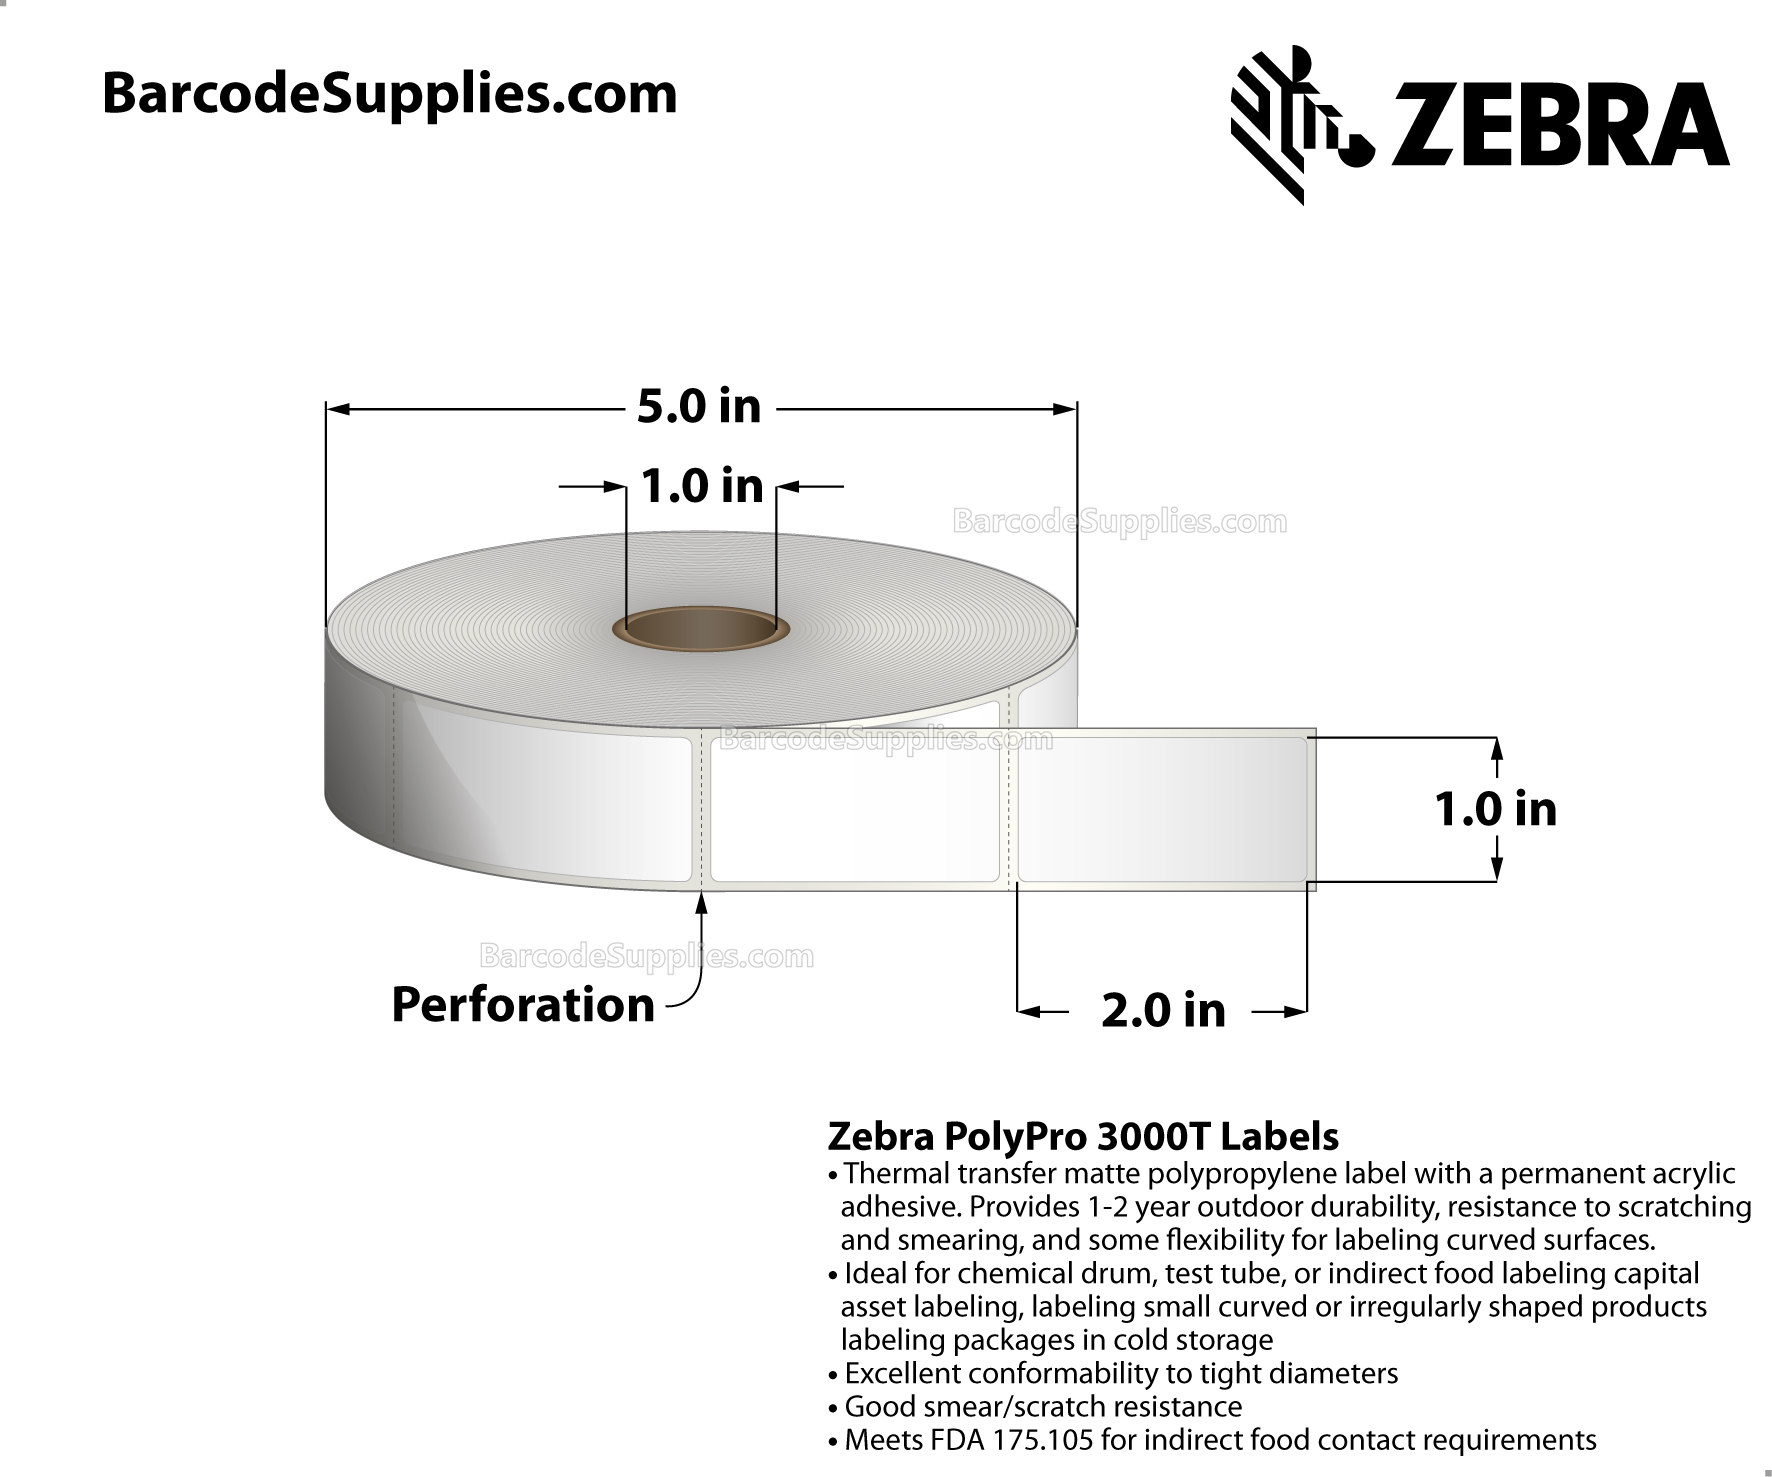 1 x 2 Thermal Transfer White PolyPro 3000T Labels With Permanent Adhesive - Perforated - 1110 Labels Per Roll - Carton Of 1 Rolls - 1110 Labels Total - MPN: 10023332v